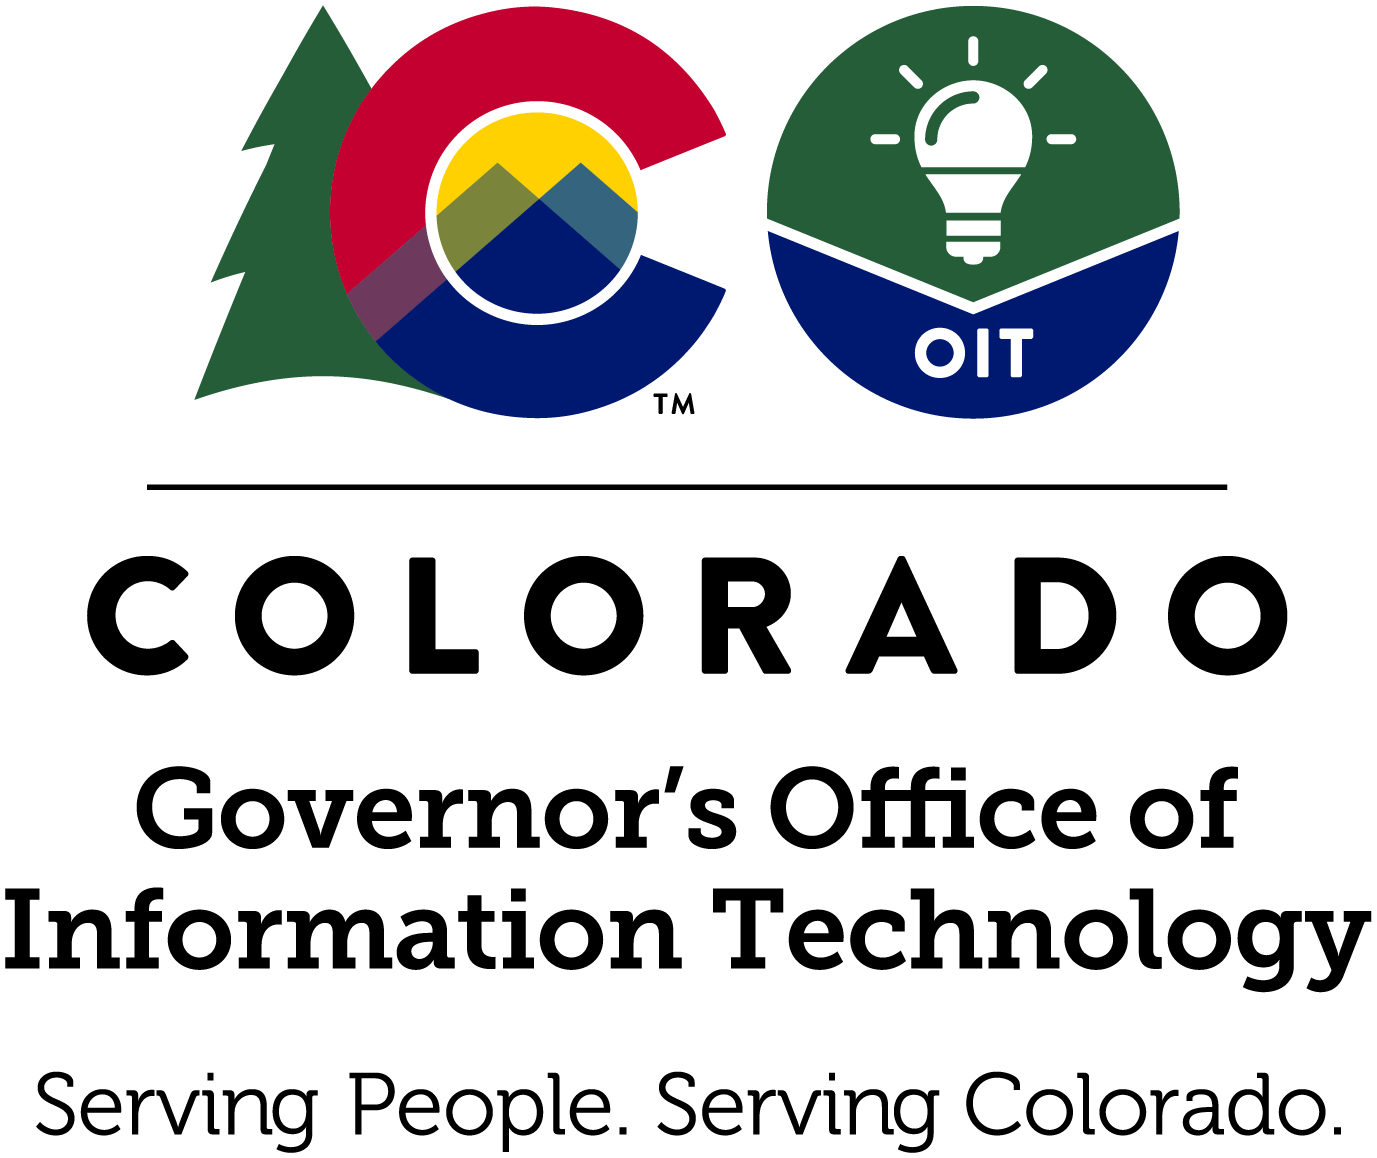 Colorado Governor's Office of Information Technology